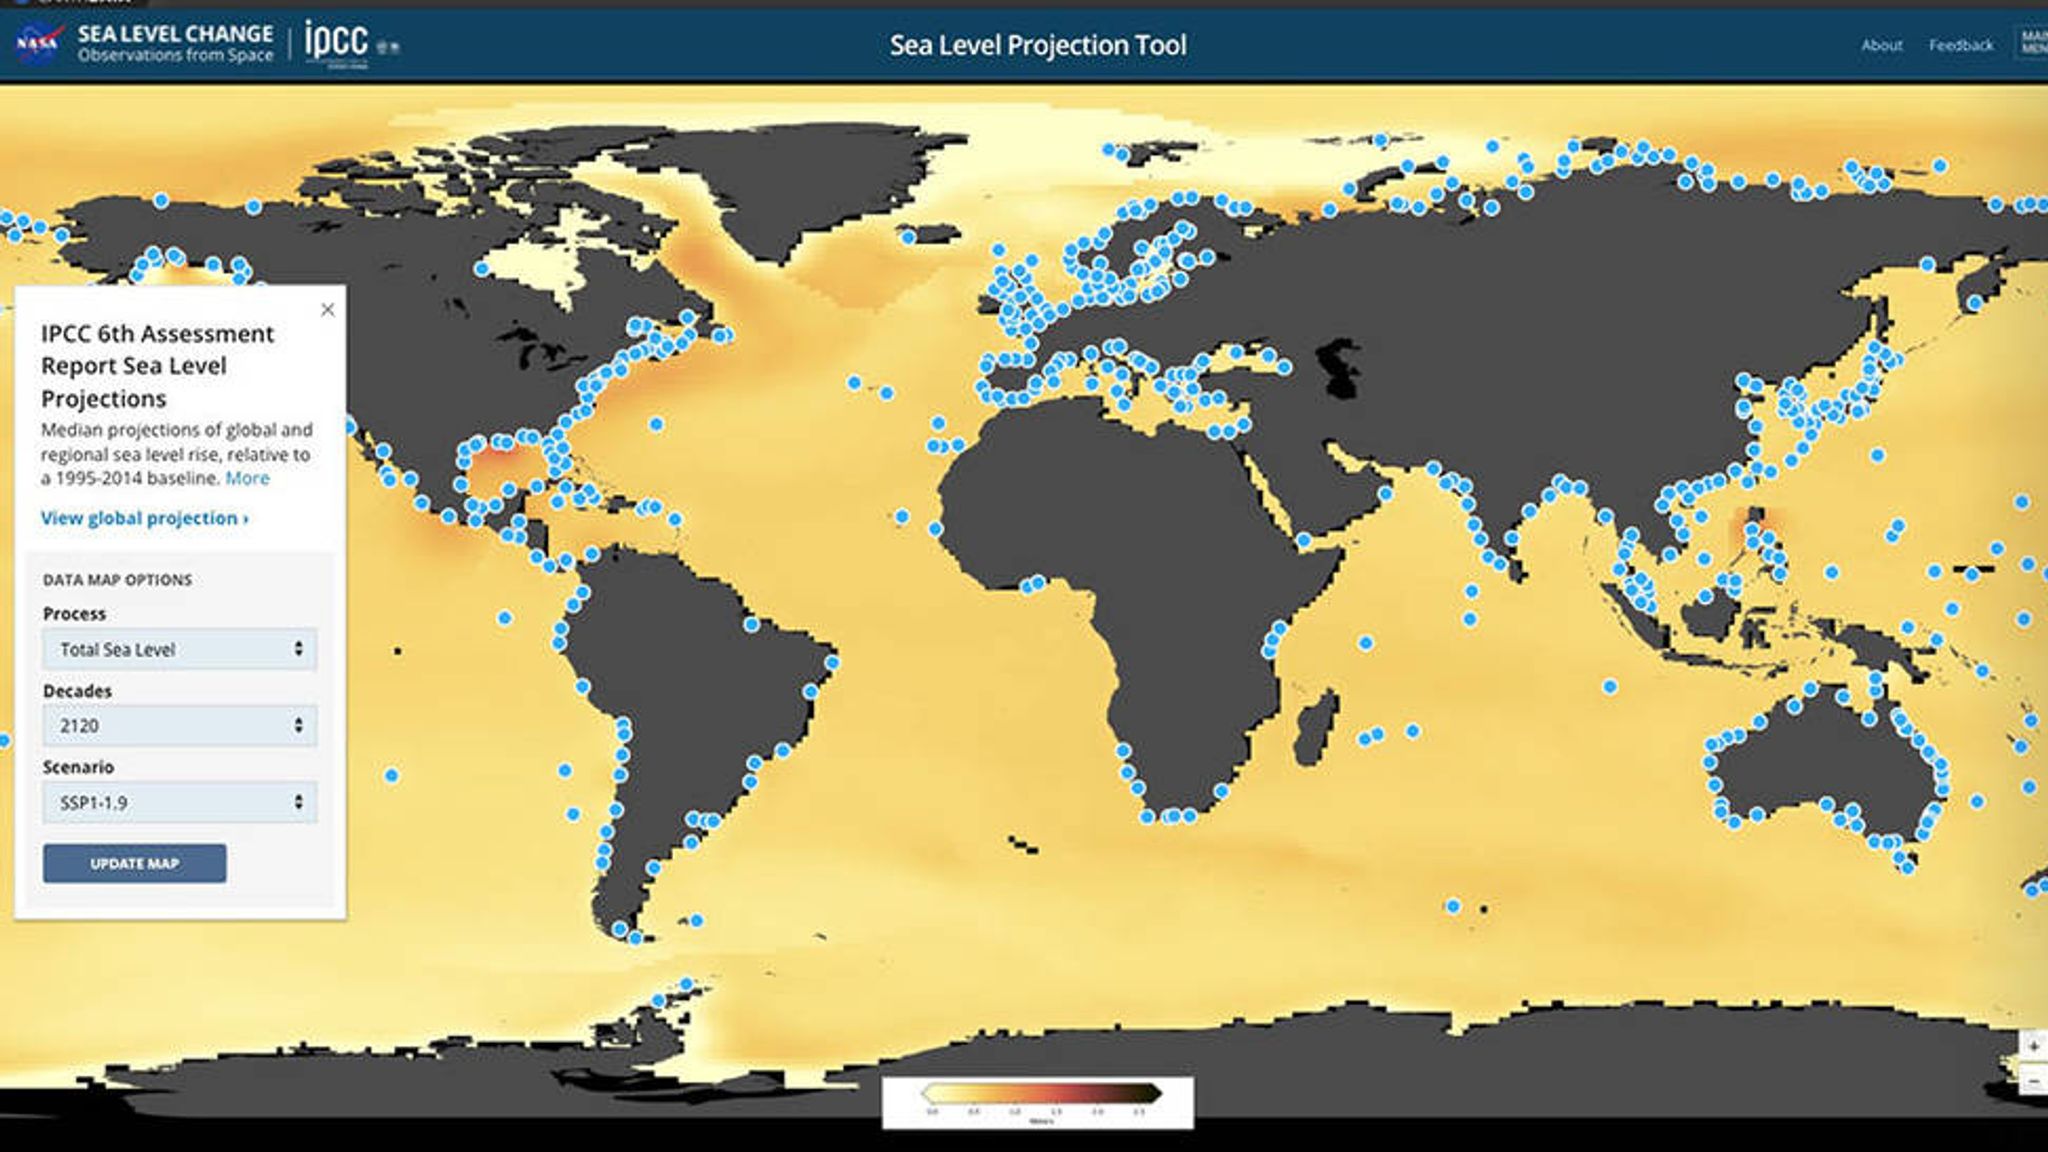 Climate change: NASA tool showing threat of rising sea levels across